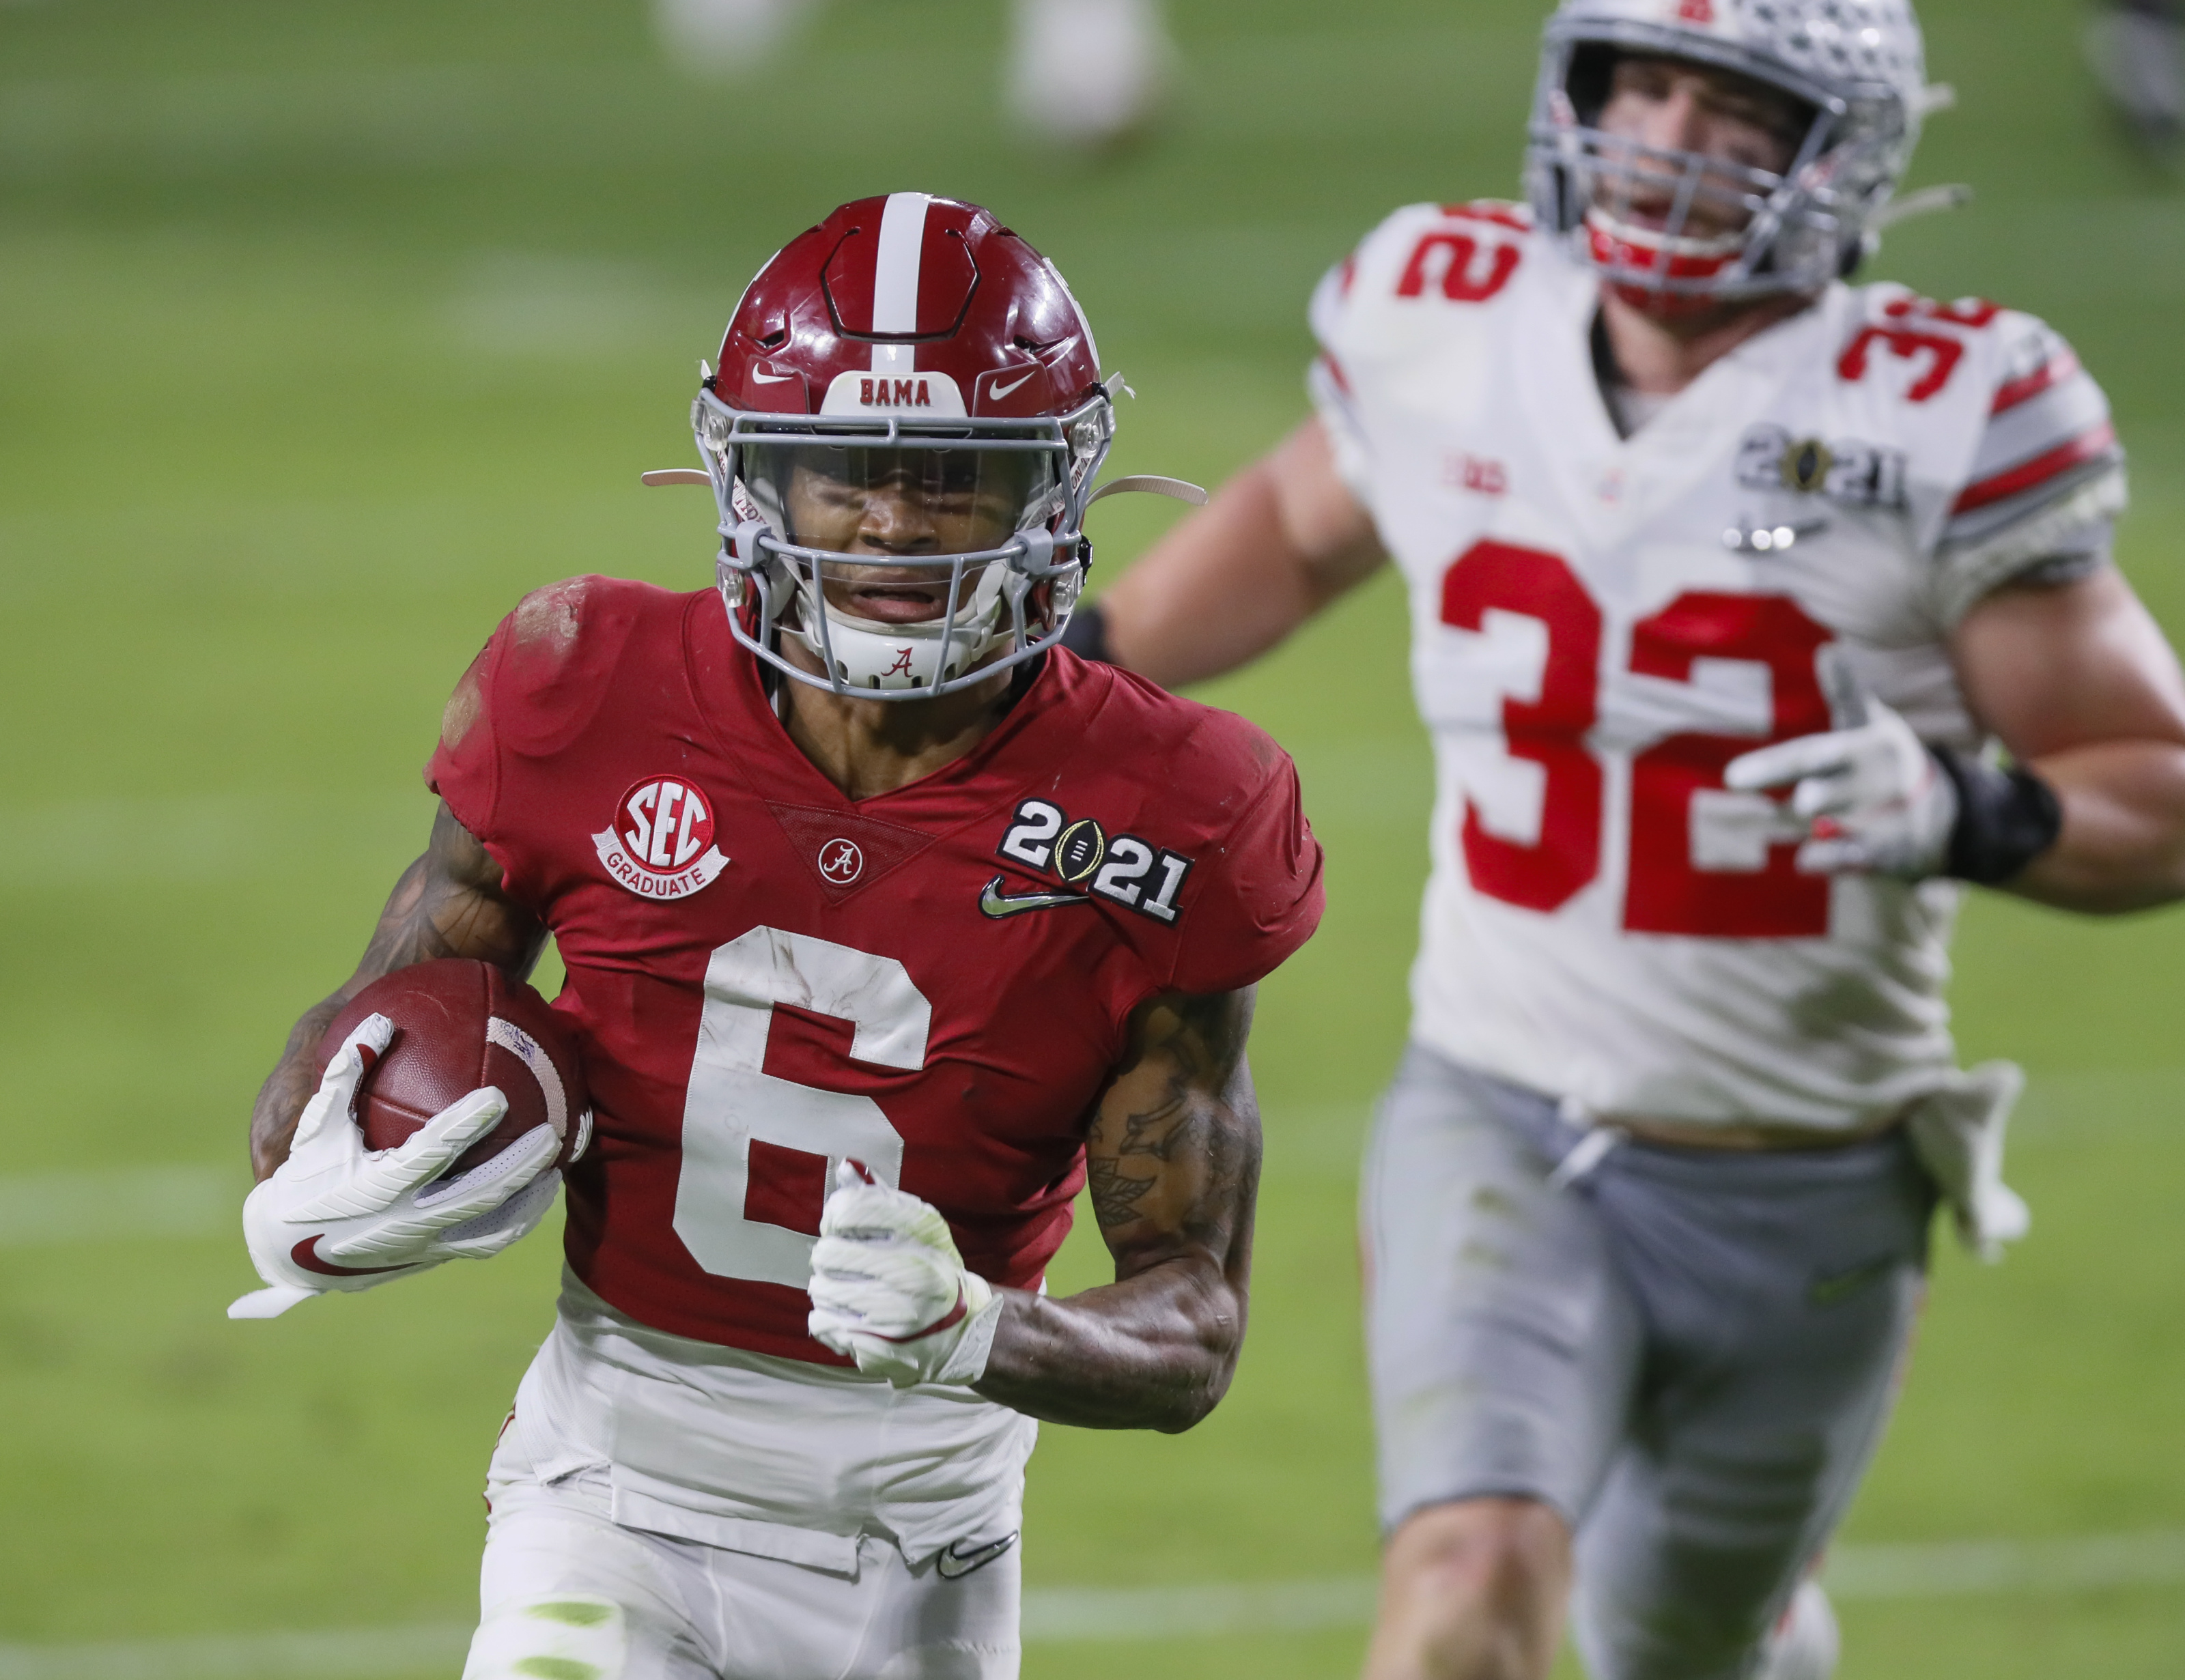 Gorman's 2021 NFL Draft WR rankings: DeVonta Smith and beyond - Page 2